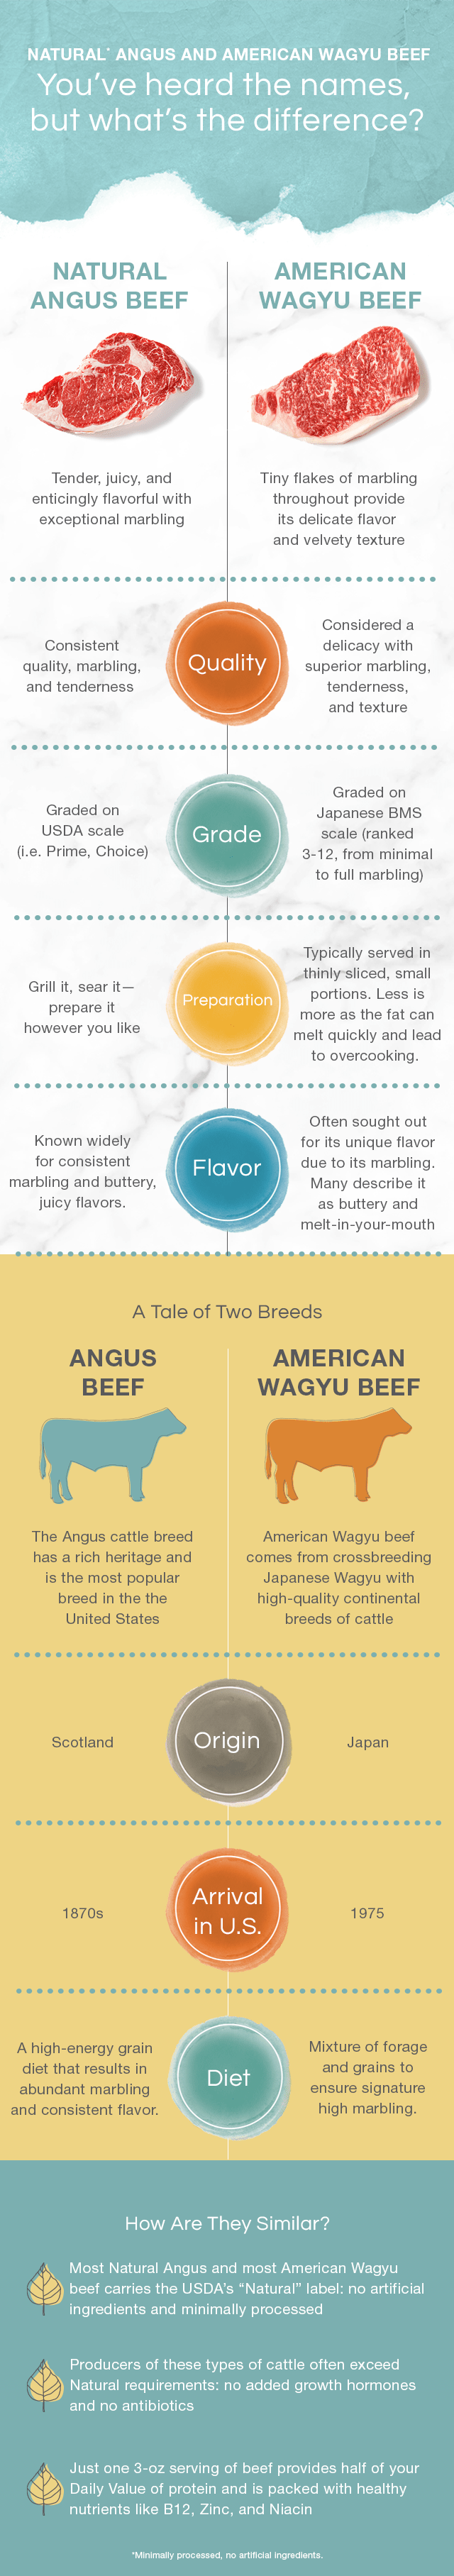 angus vs wagyu beef infographic comparing differences and similarities